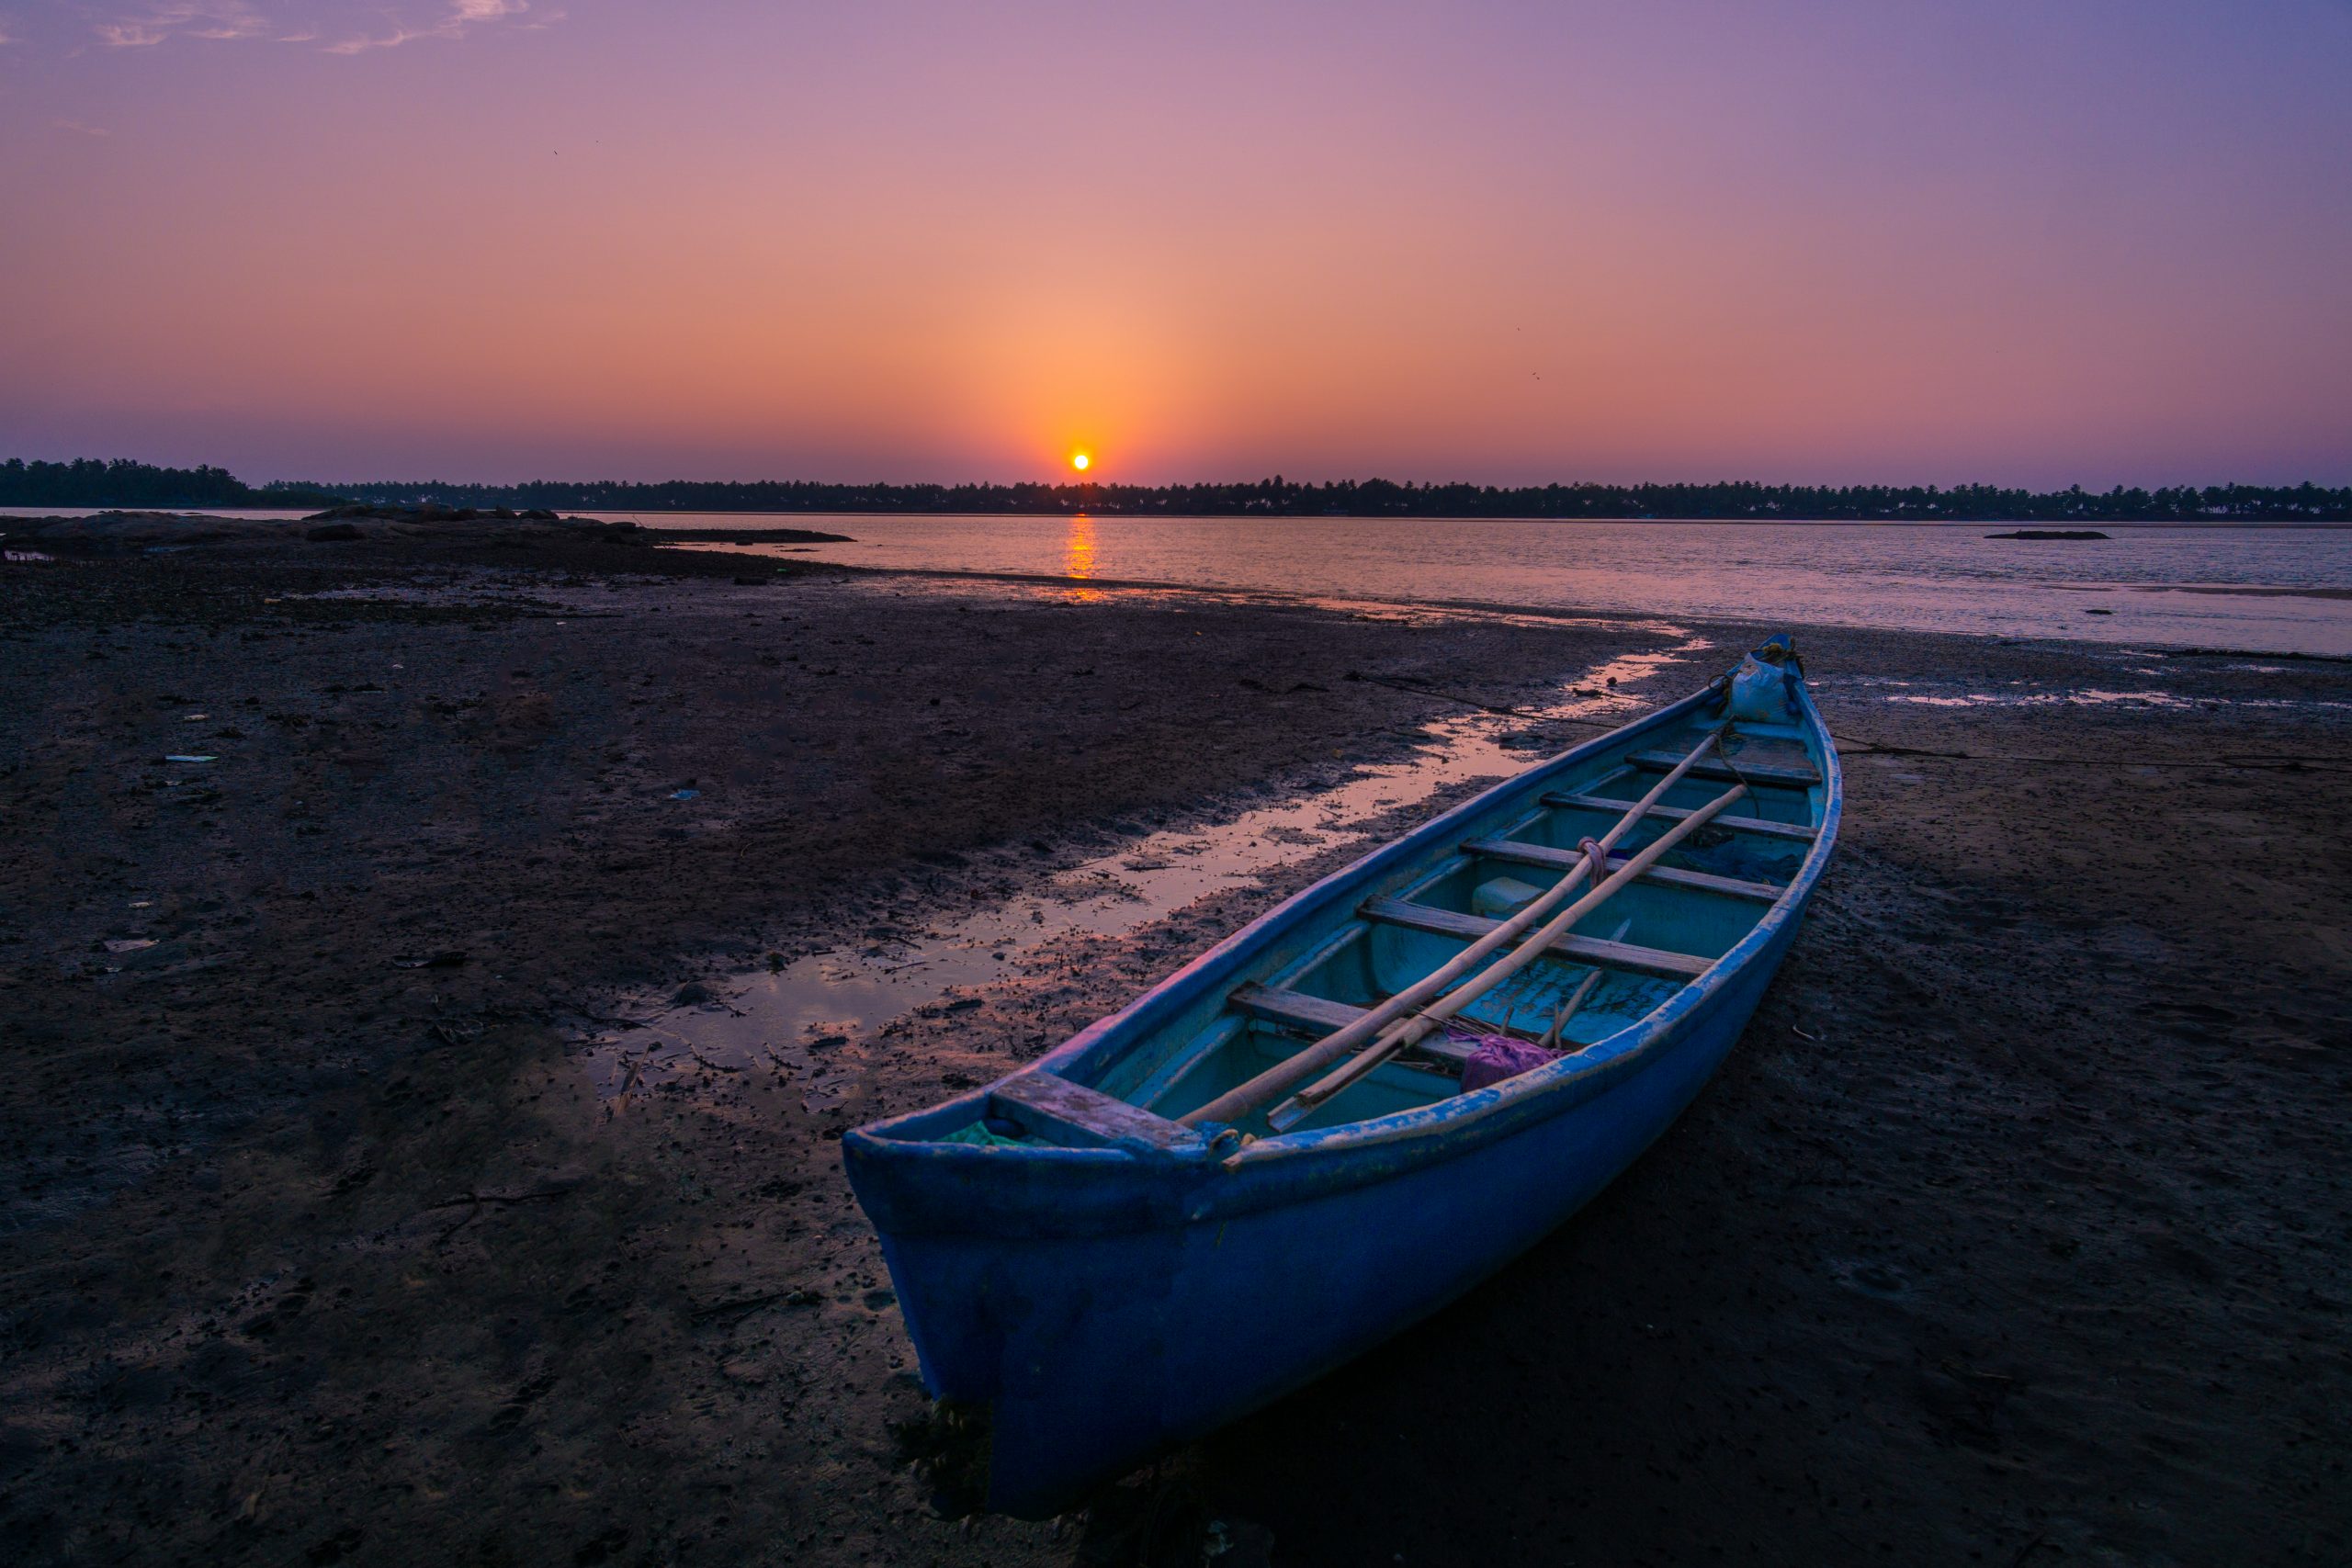 Boat near the river during beautiful sunset